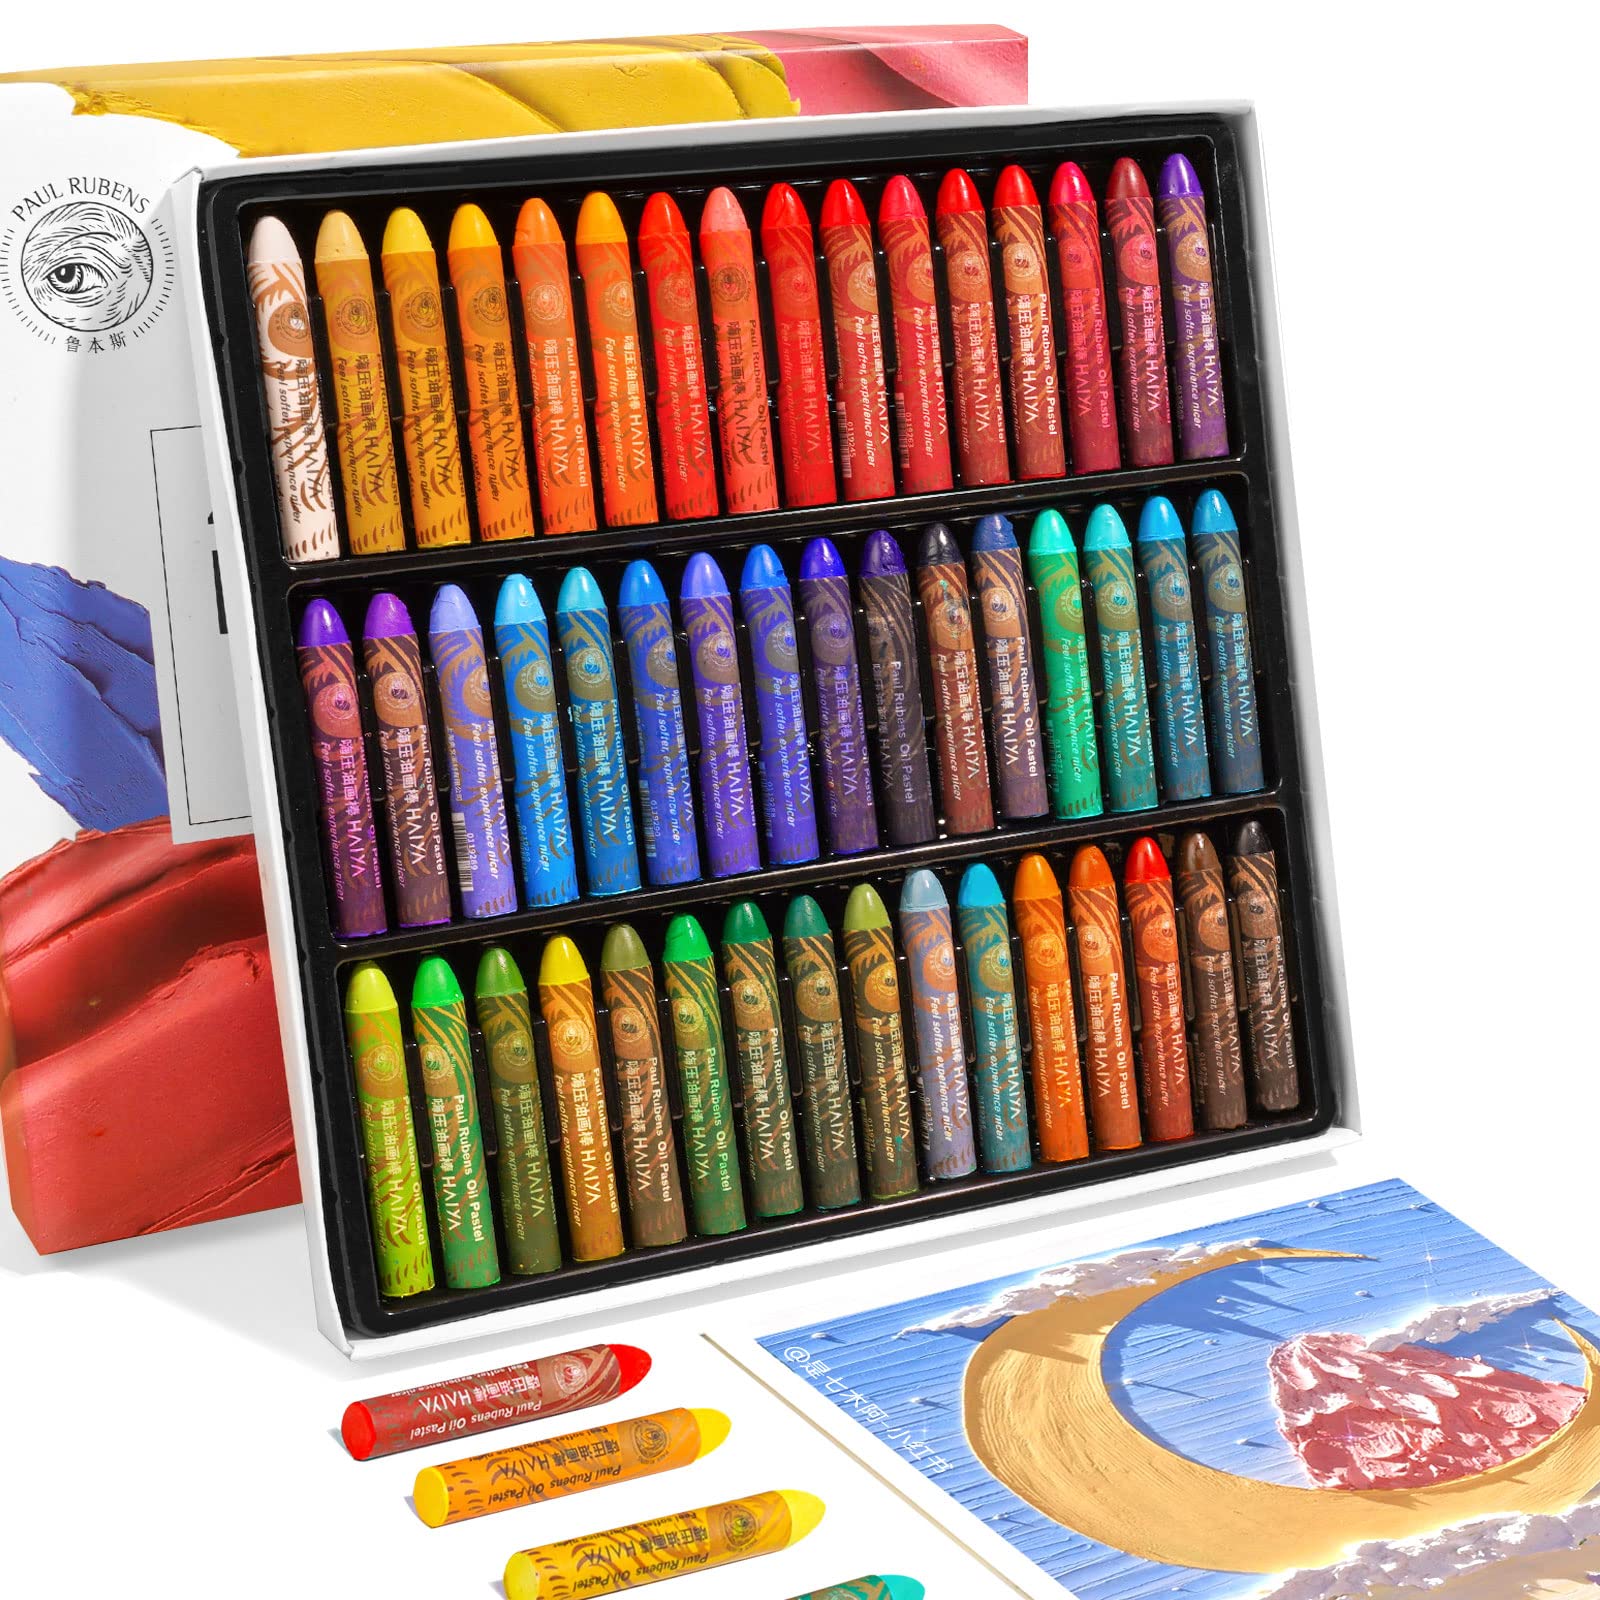 Paul Rubens Oil Pastels Set 48 Colors Artist Soft Oil Pastels Vibrant and  Creamy Pastels Art Supplies for Artists Beginners Students Kids Art  Painting Drawing HAIYA 48 Colors